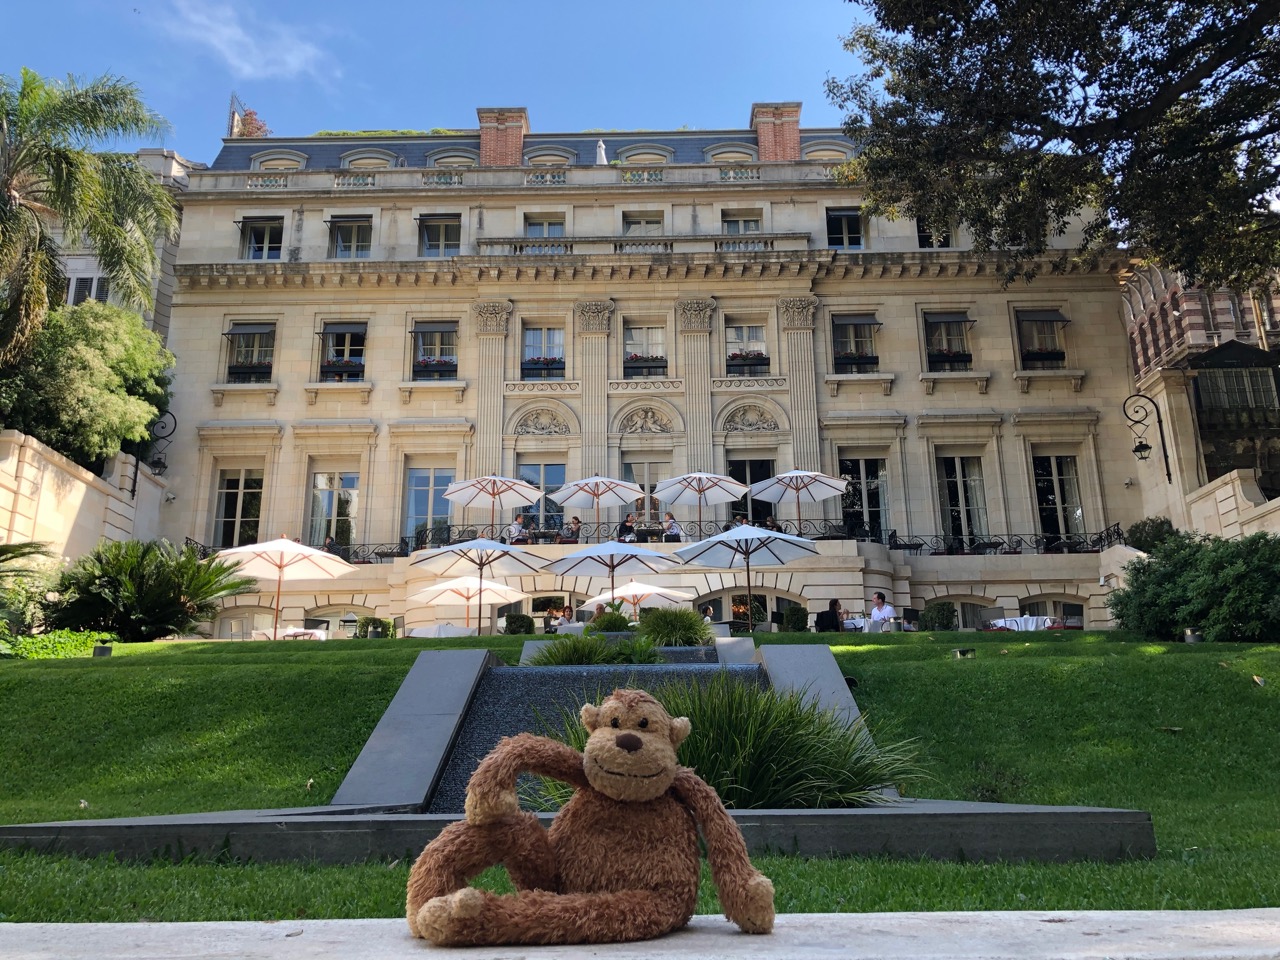 a stuffed animal sitting on a bench in front of a large building